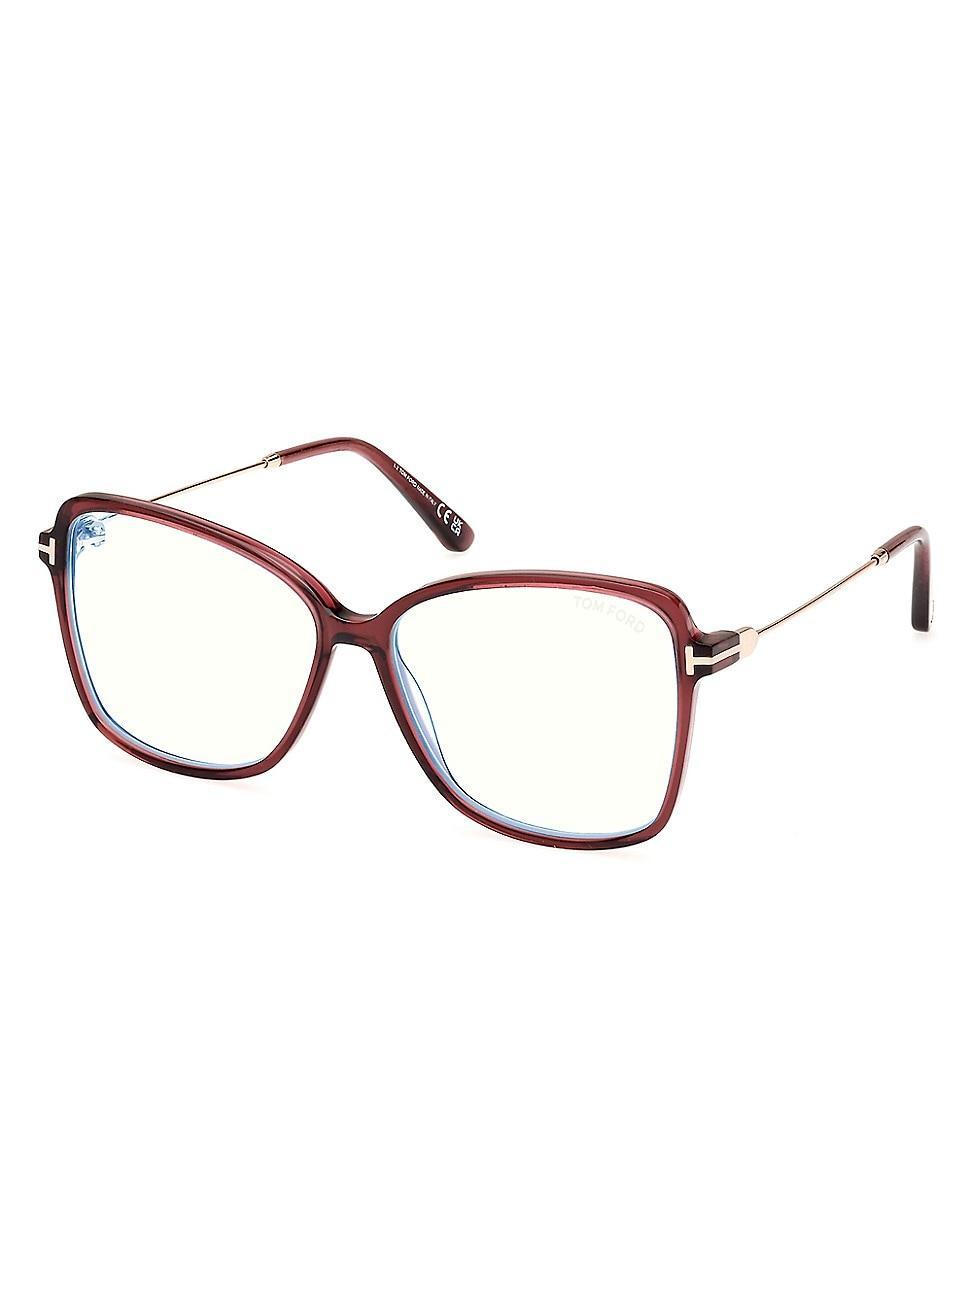 Womens 55MM Blue Block Butterfly Eyeglasses Product Image